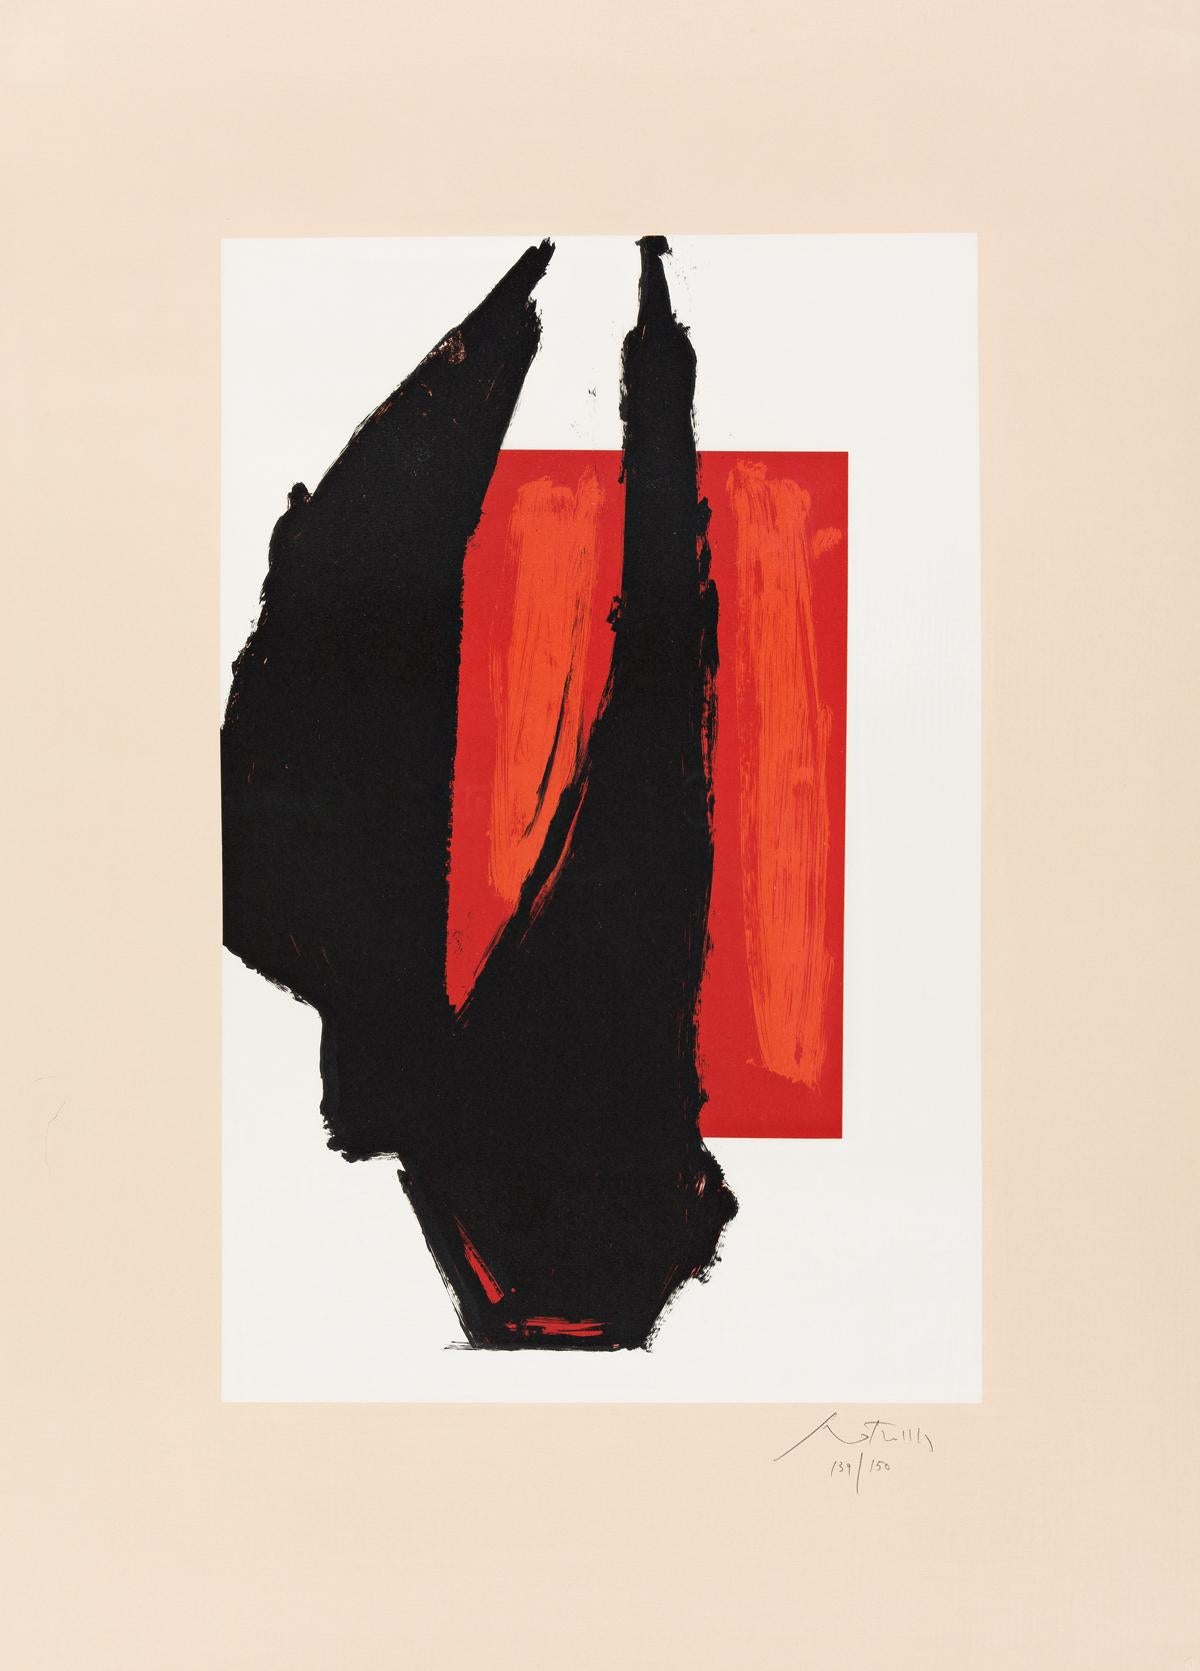 Colorful lithograph by American Abstract Expressionist artist Robert Motherwell from a limited edition of 150.  Signed by Motherwell and numbered in pencil.  Printed by Tyler Graphics, Ltd., Bedford, with the blind stamp lower right. 